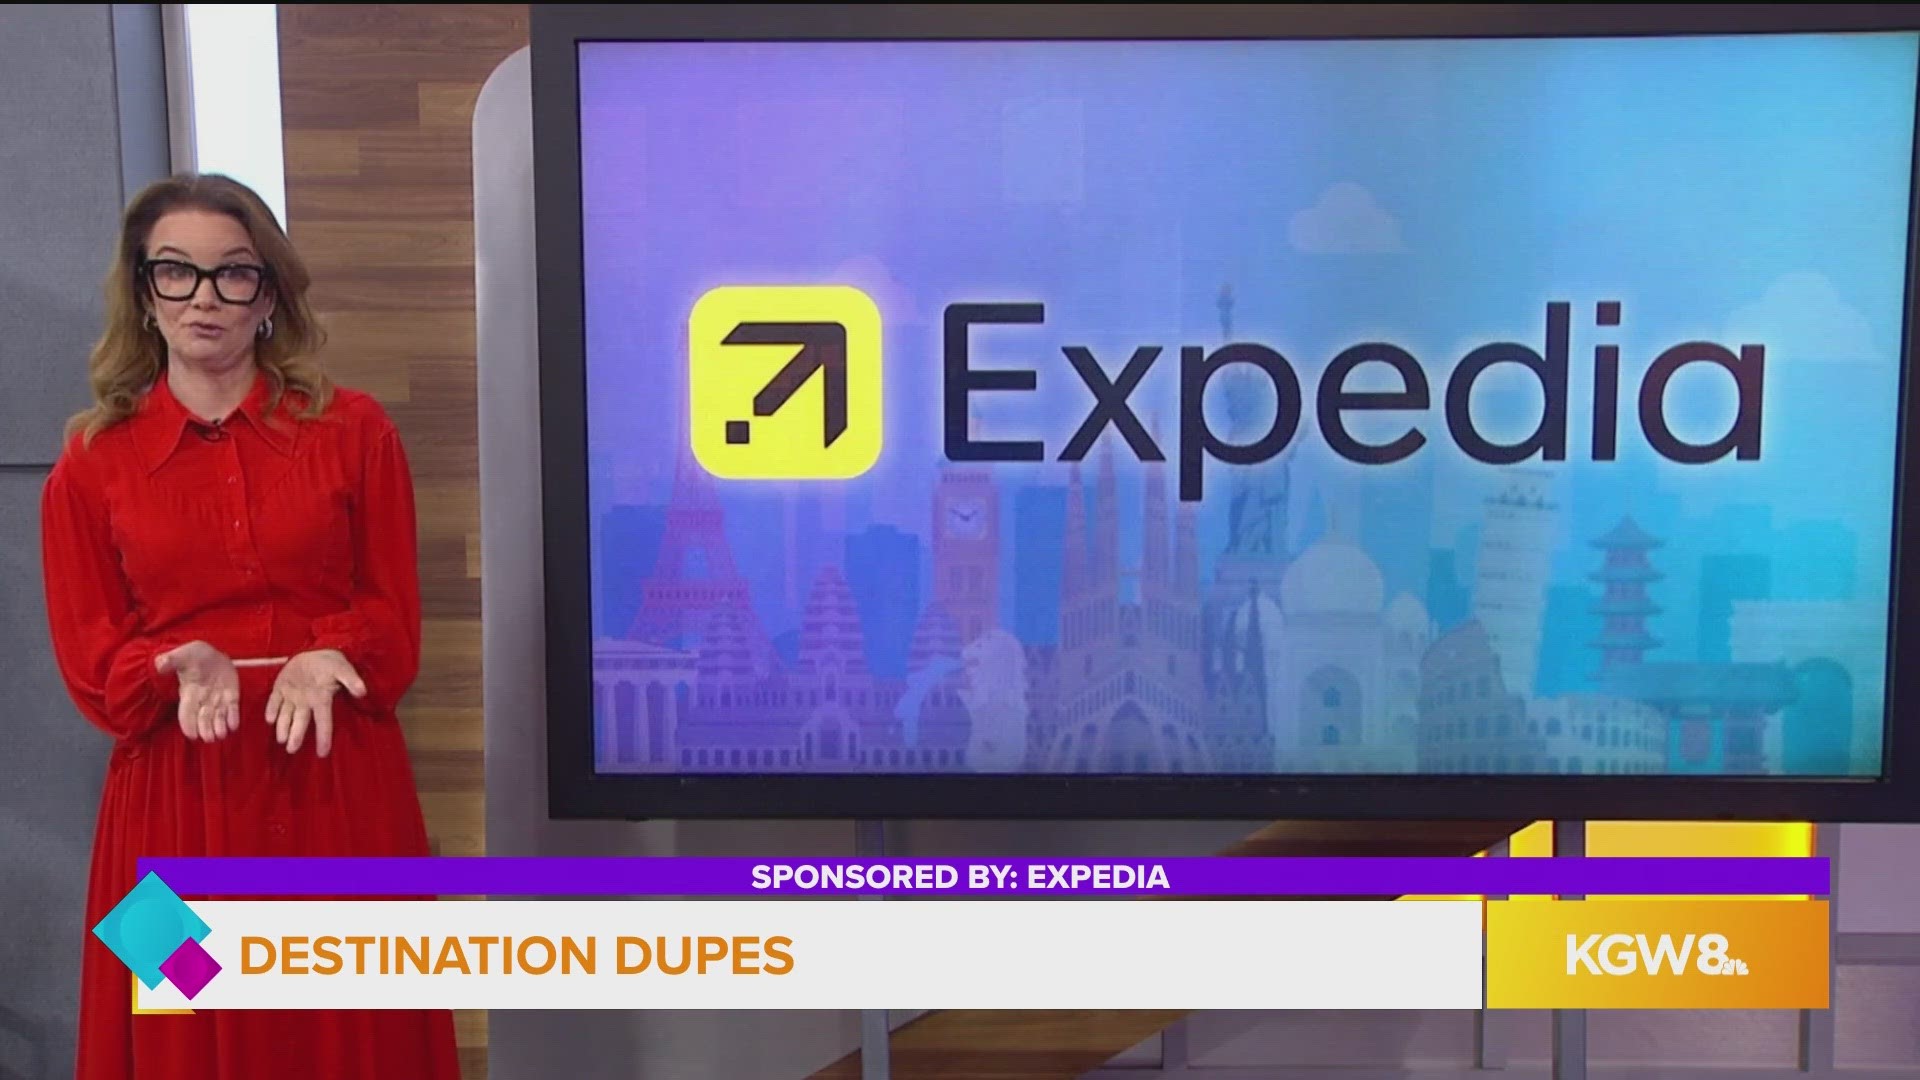 This segment is sponsored by Expedia